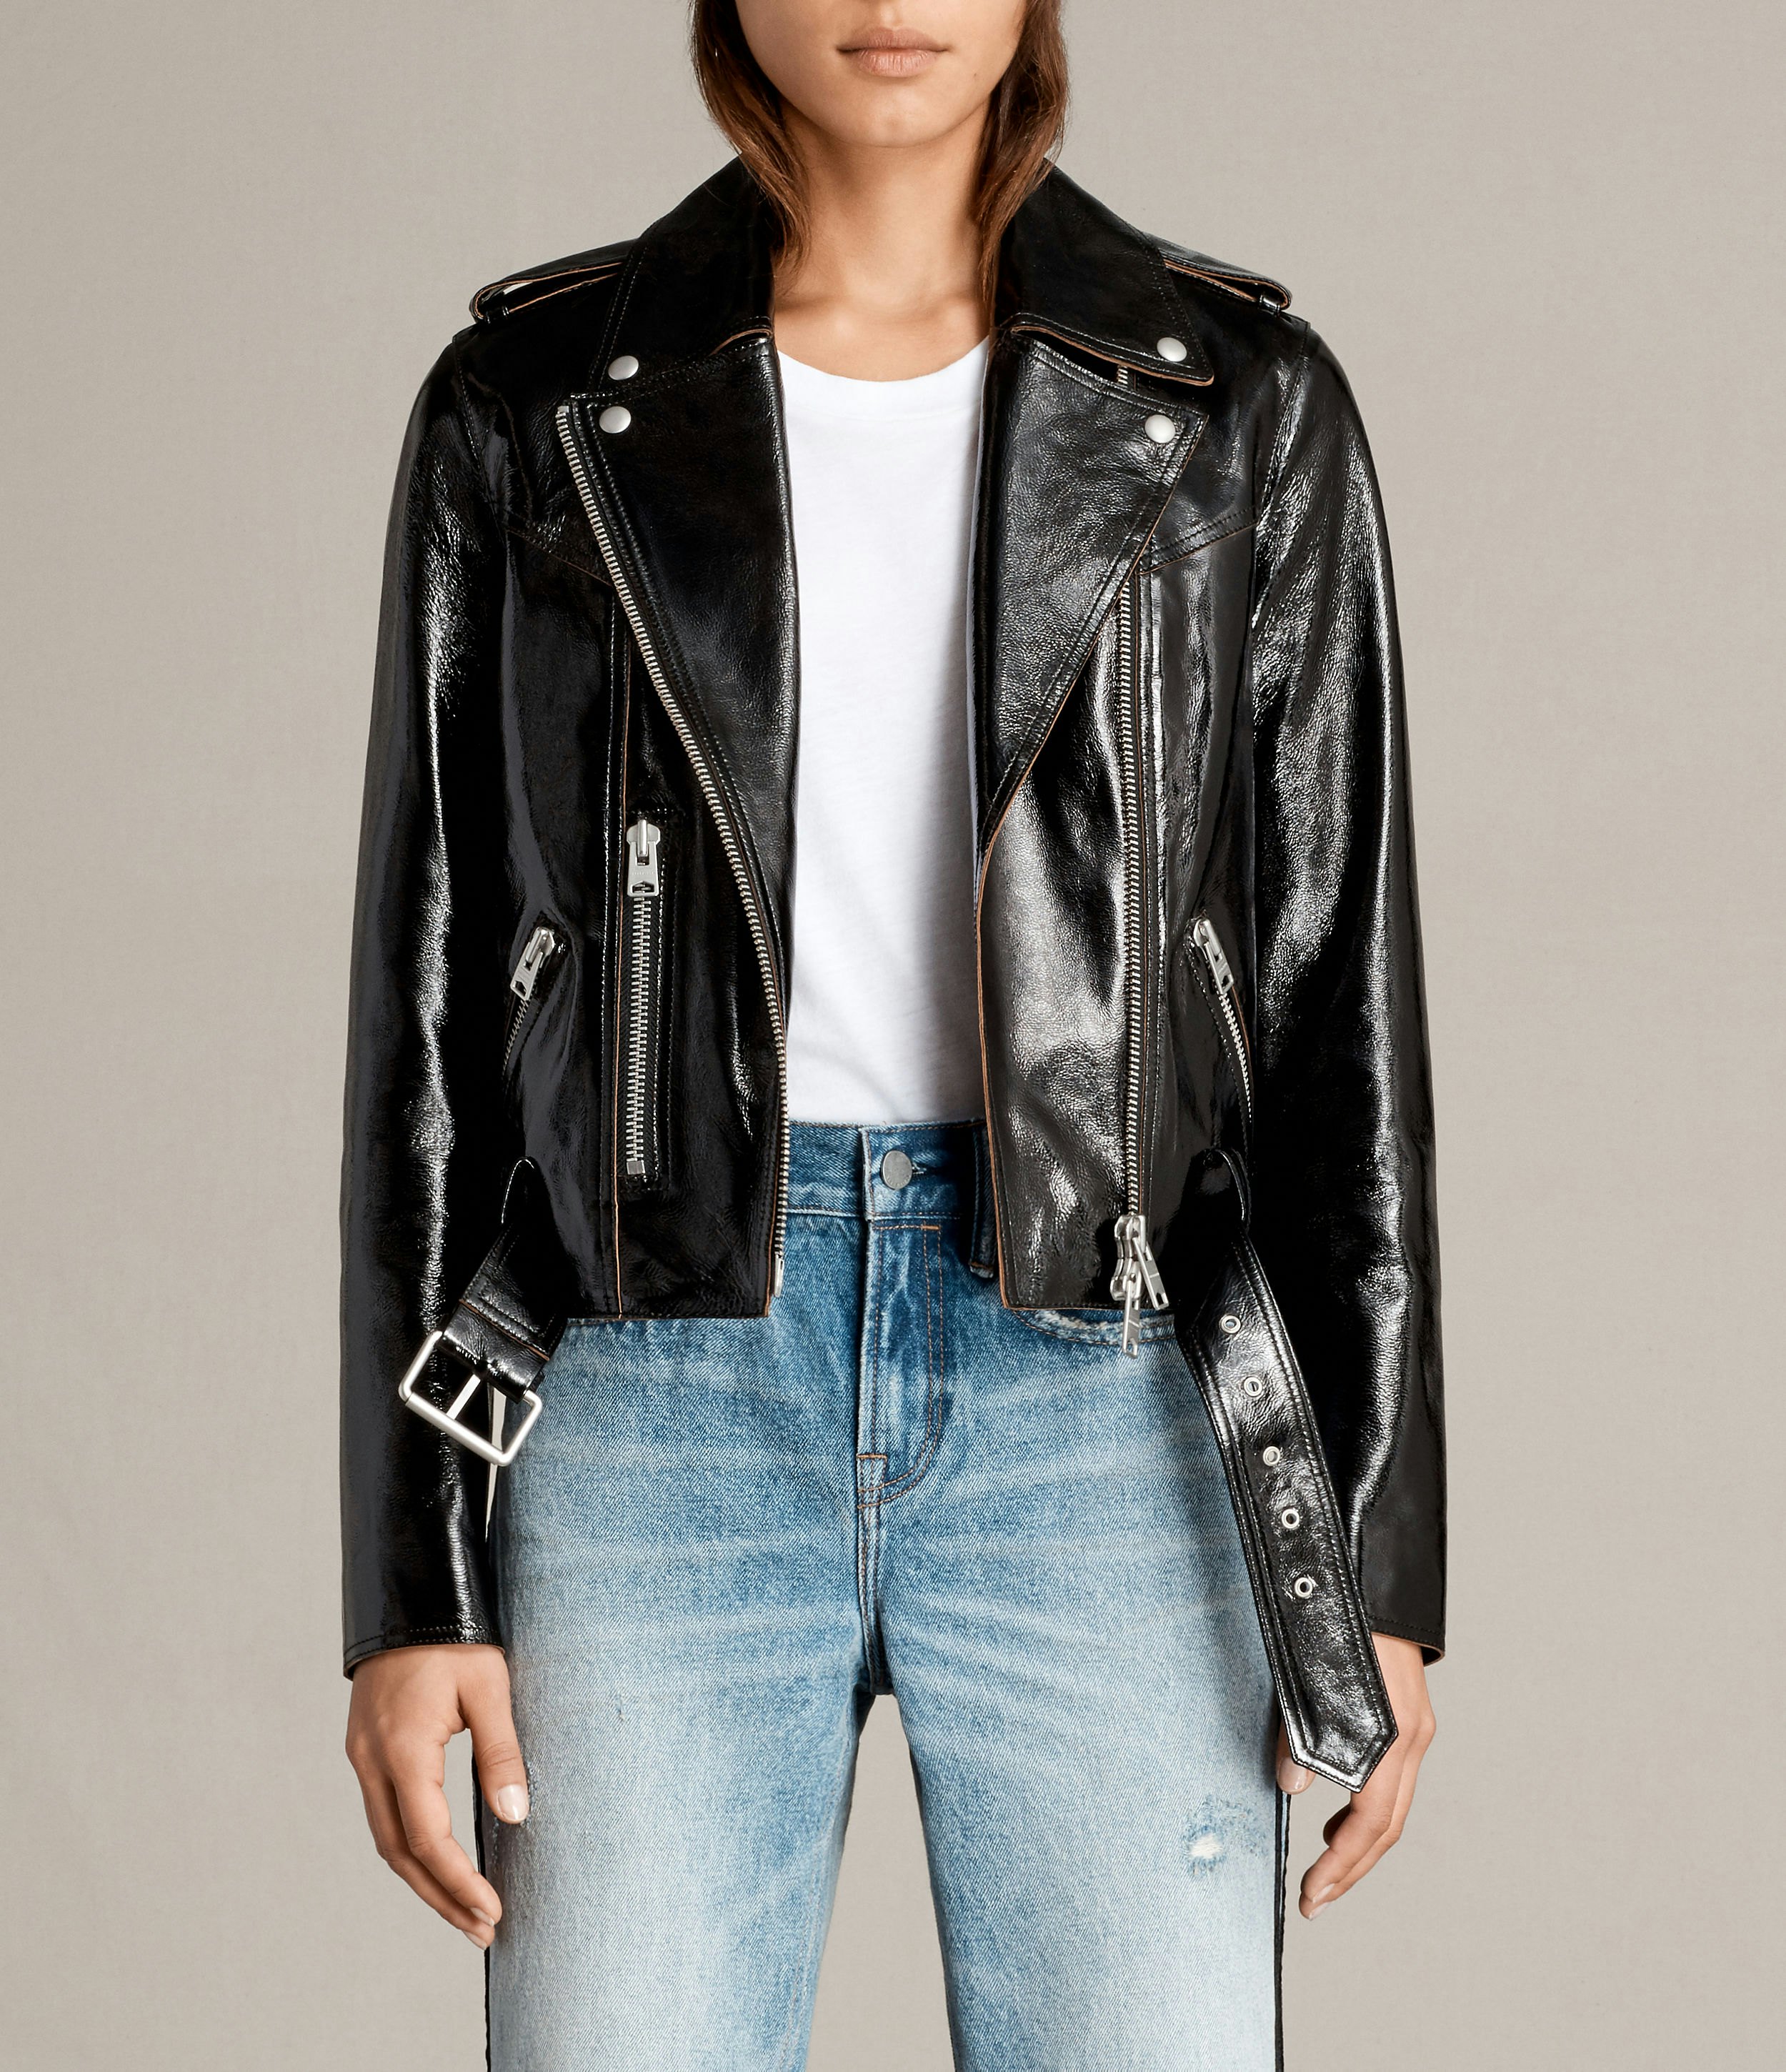 How To Break In A Leather Jacket In Time For Fall According To